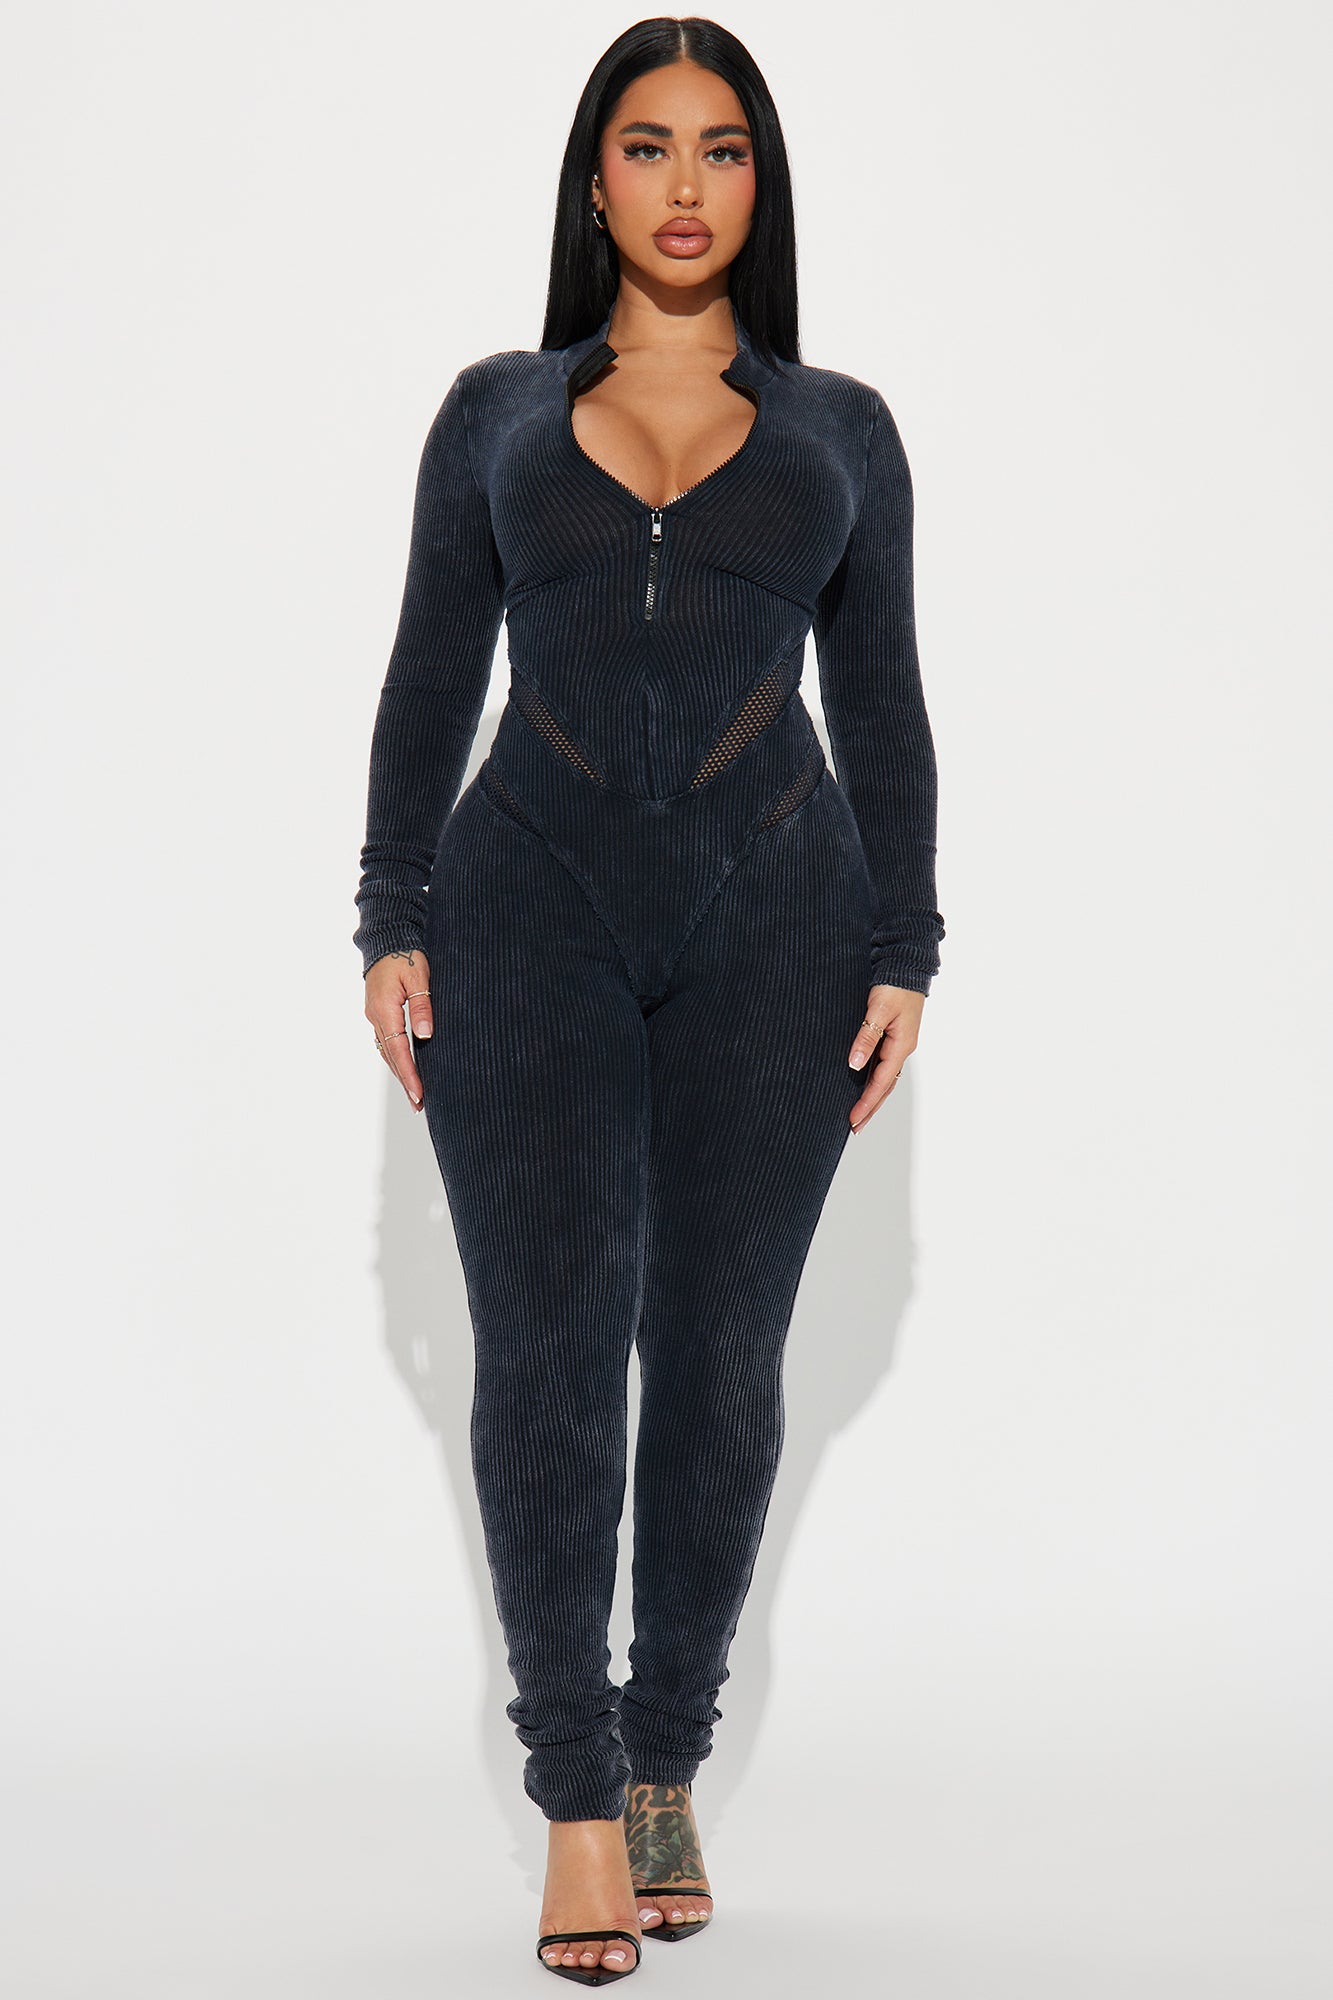 This jumpsuit from @voyjoy is my ABSOLUTE NEW FAVE